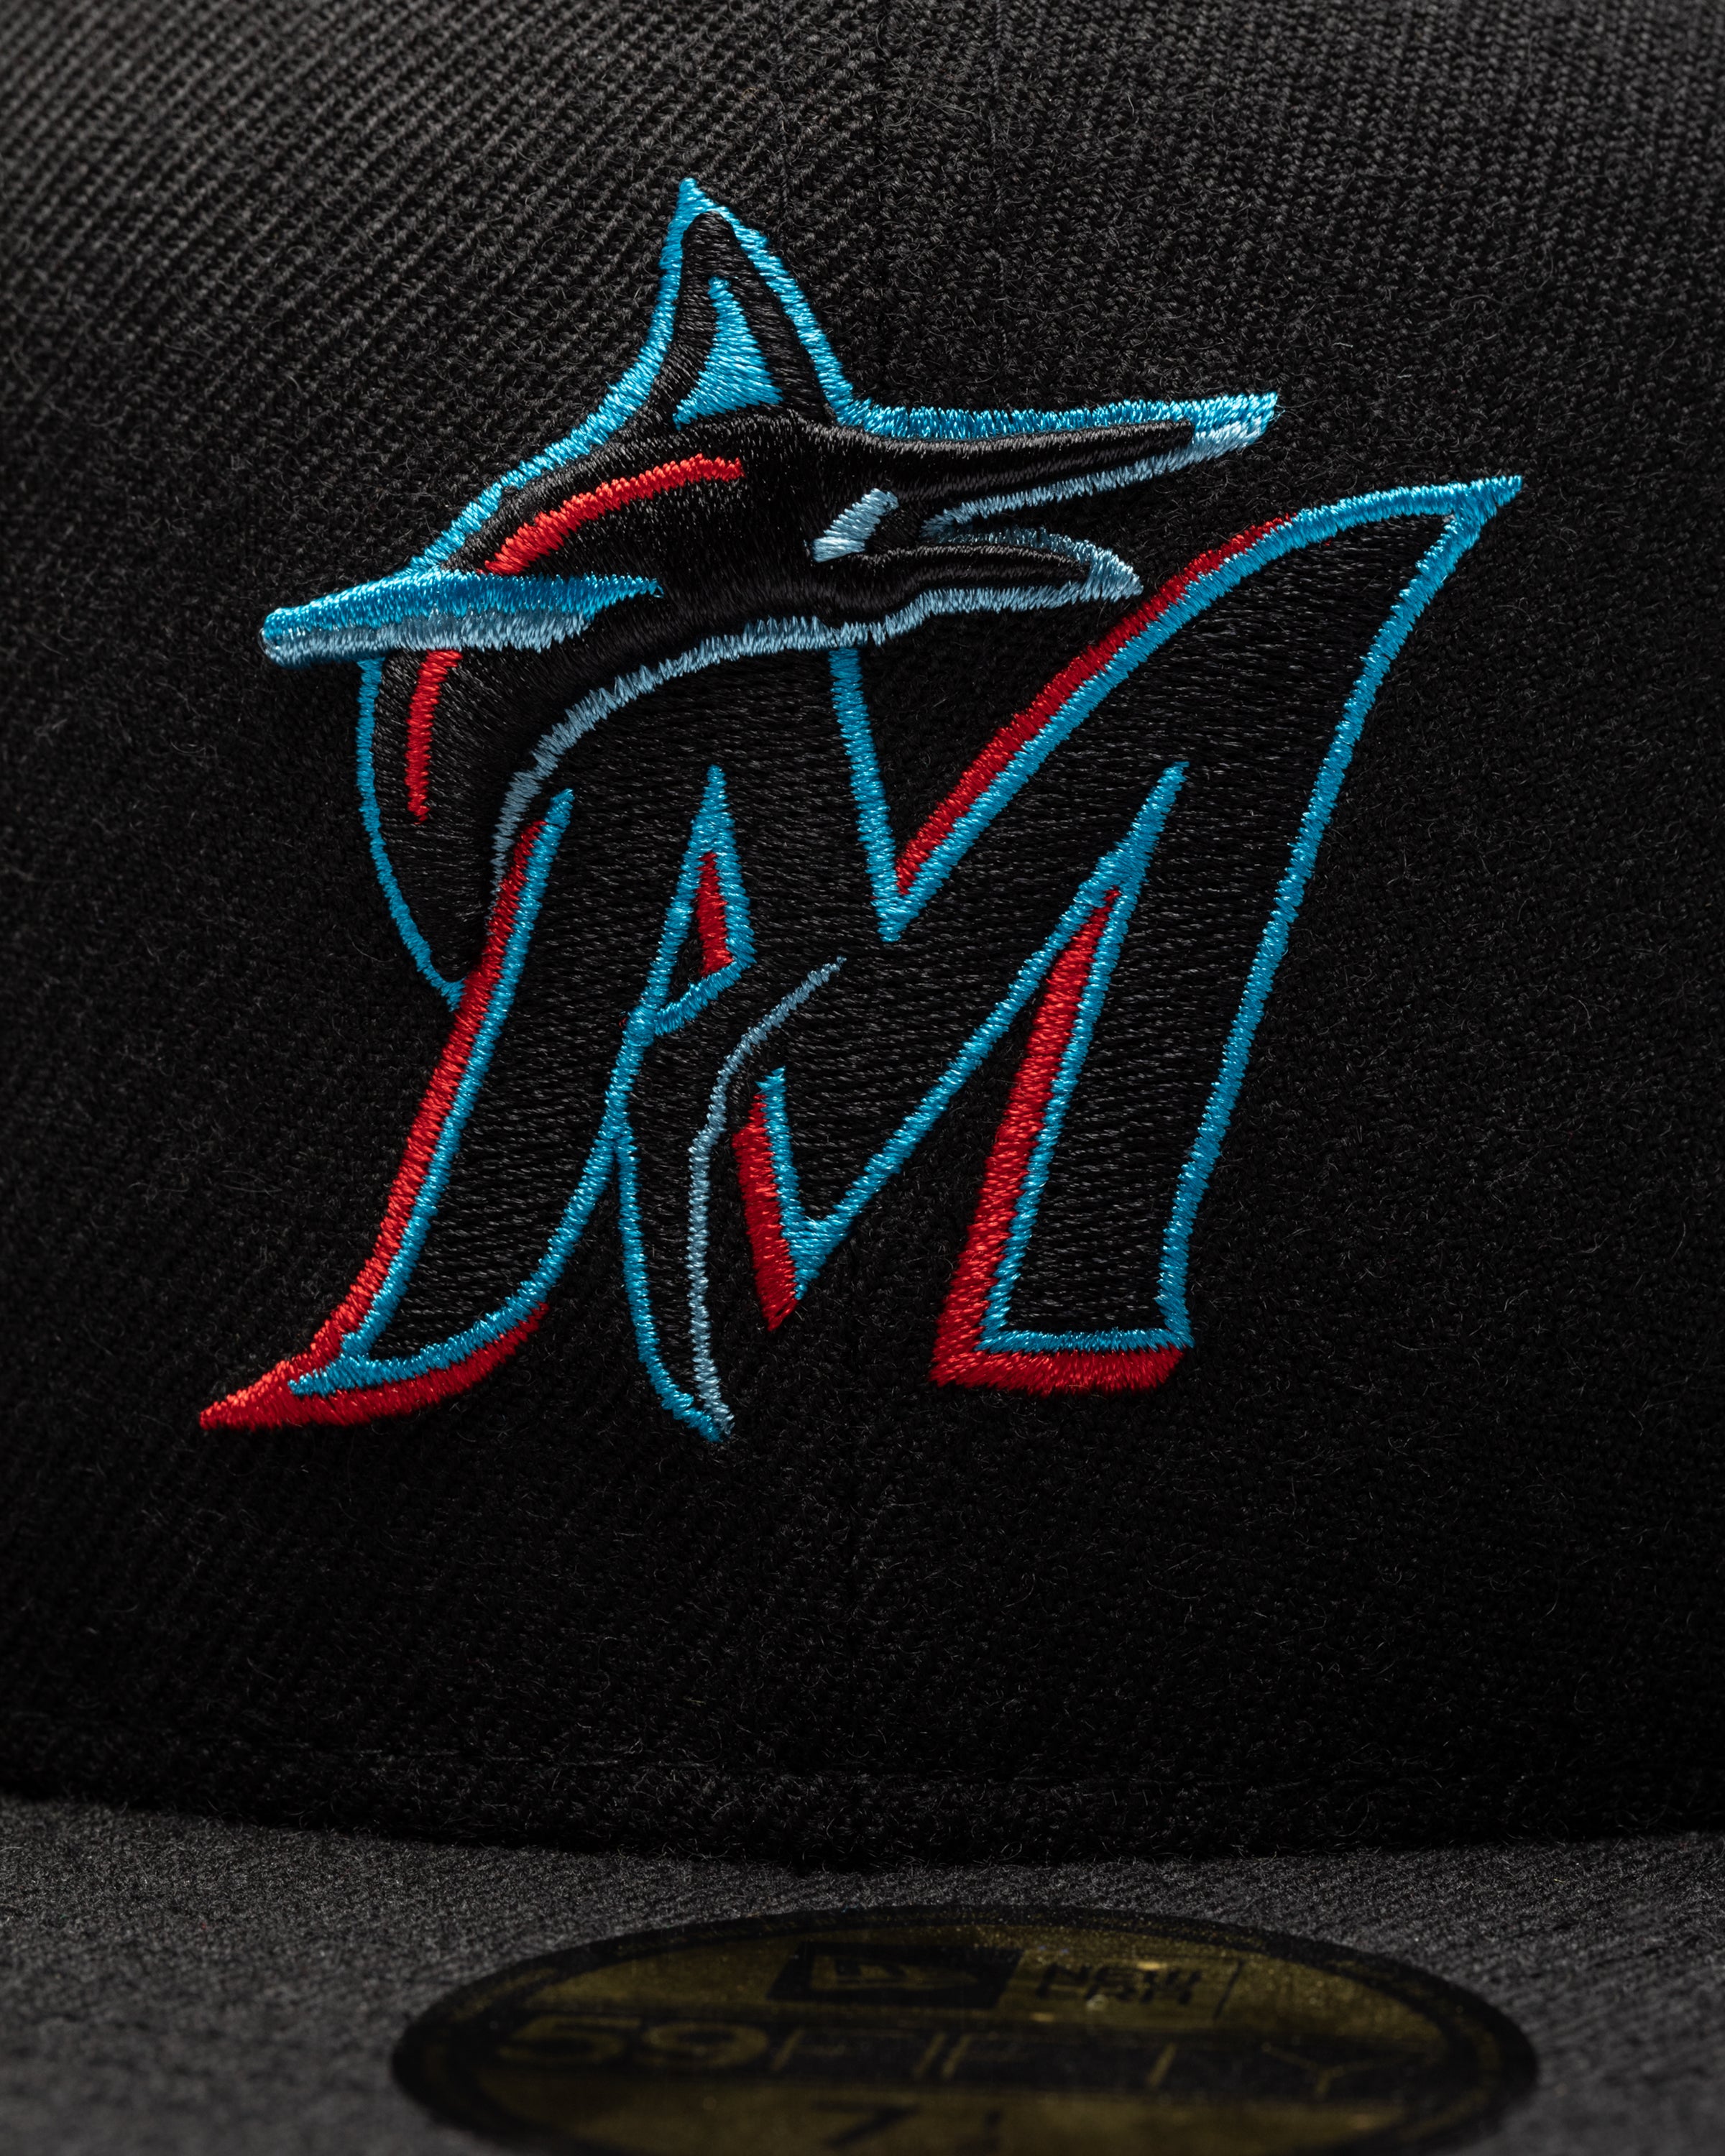 UNDEFEATED X NE X MLB FITTED - MIAMI MARLINS